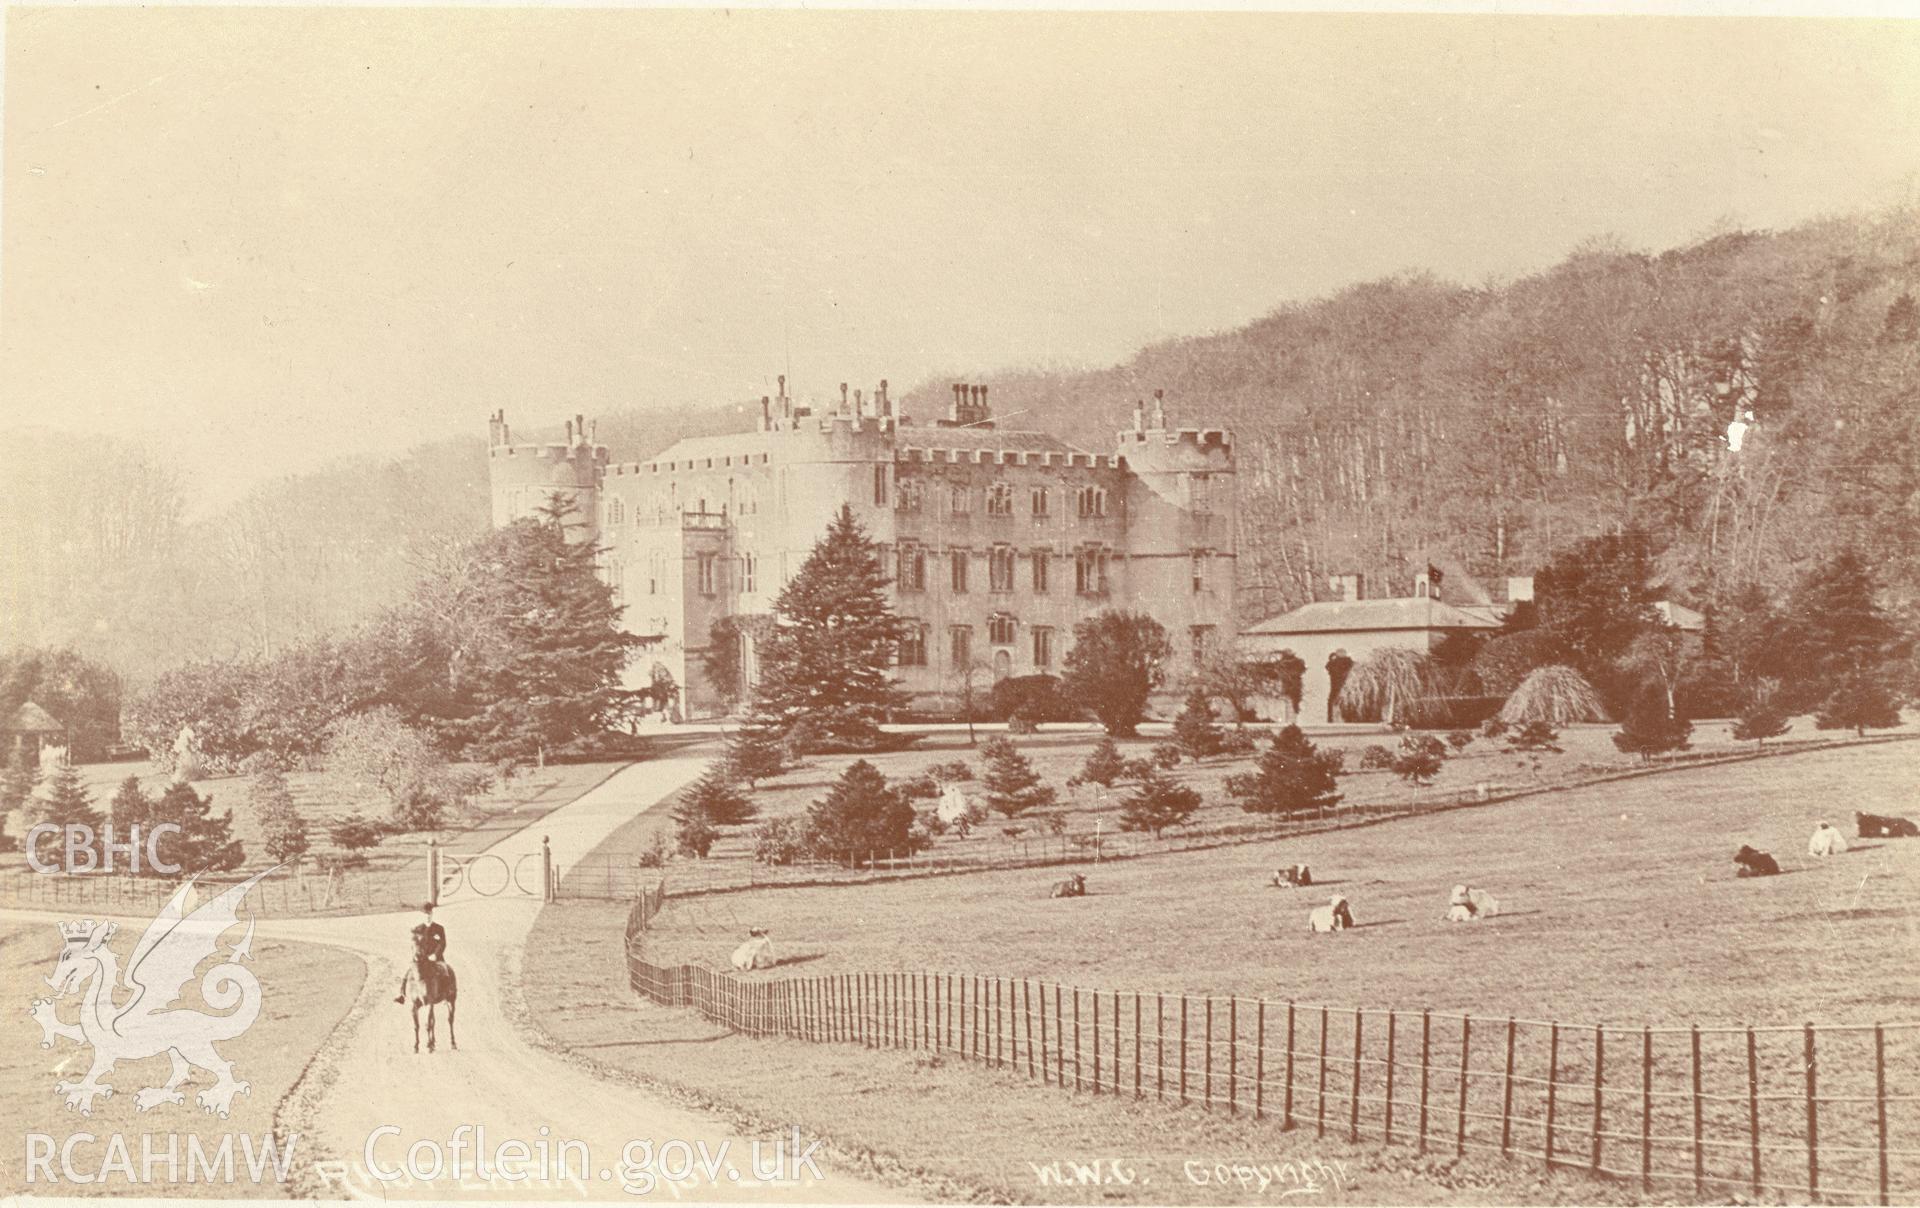 Digitised postcard image of Ruperra Castle, Draethen, WWC Copyright. Produced by Parks and Gardens Data Services, from an original item in the Peter Davis Collection at Parks and Gardens UK. We hold only web-resolution images of this collection, suitable for viewing on screen and for research purposes only. We do not hold the original images, or publication quality scans.